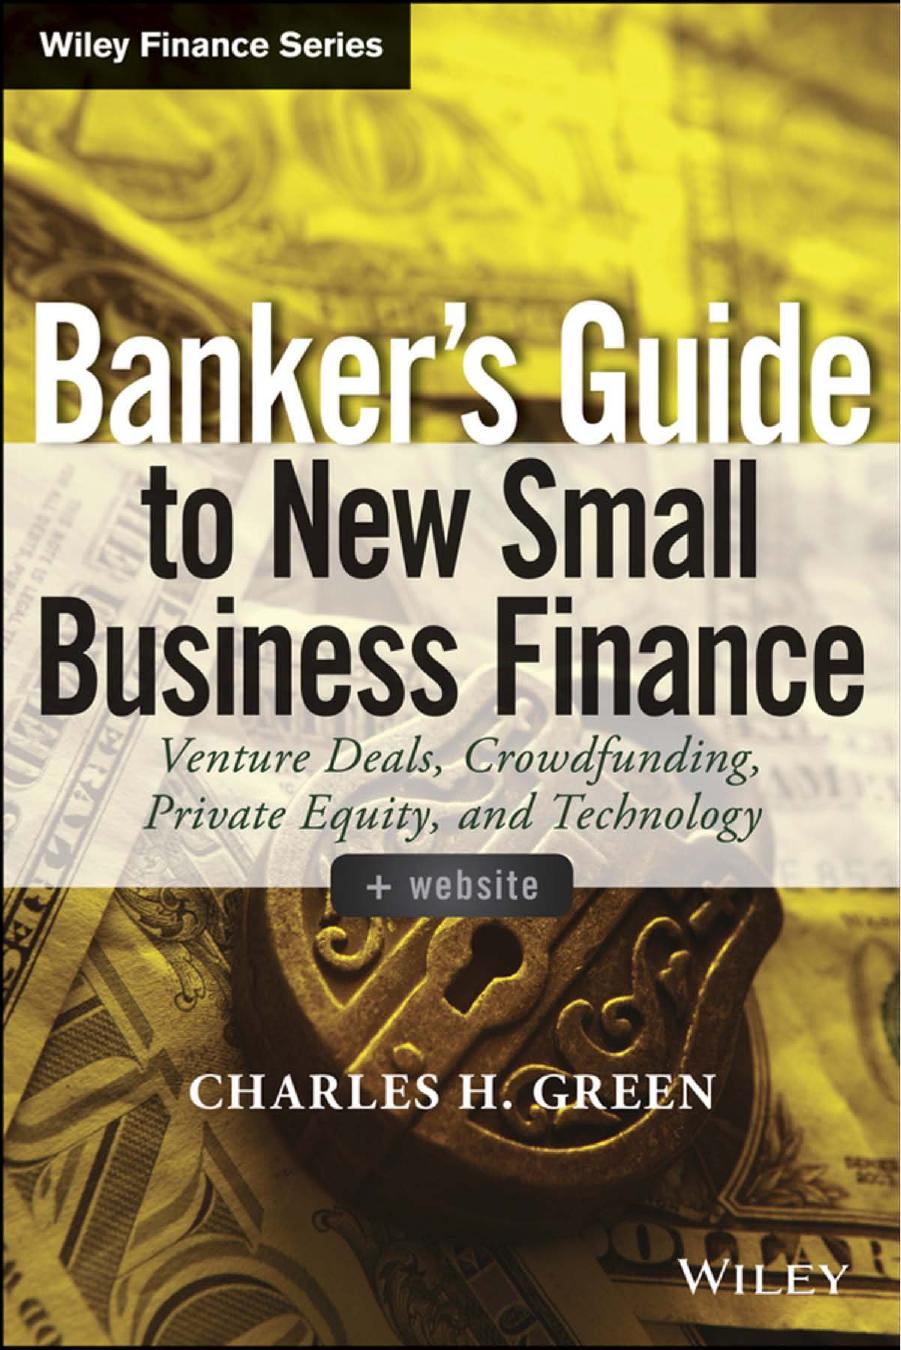 Banker's Guide to New Small Business Finance